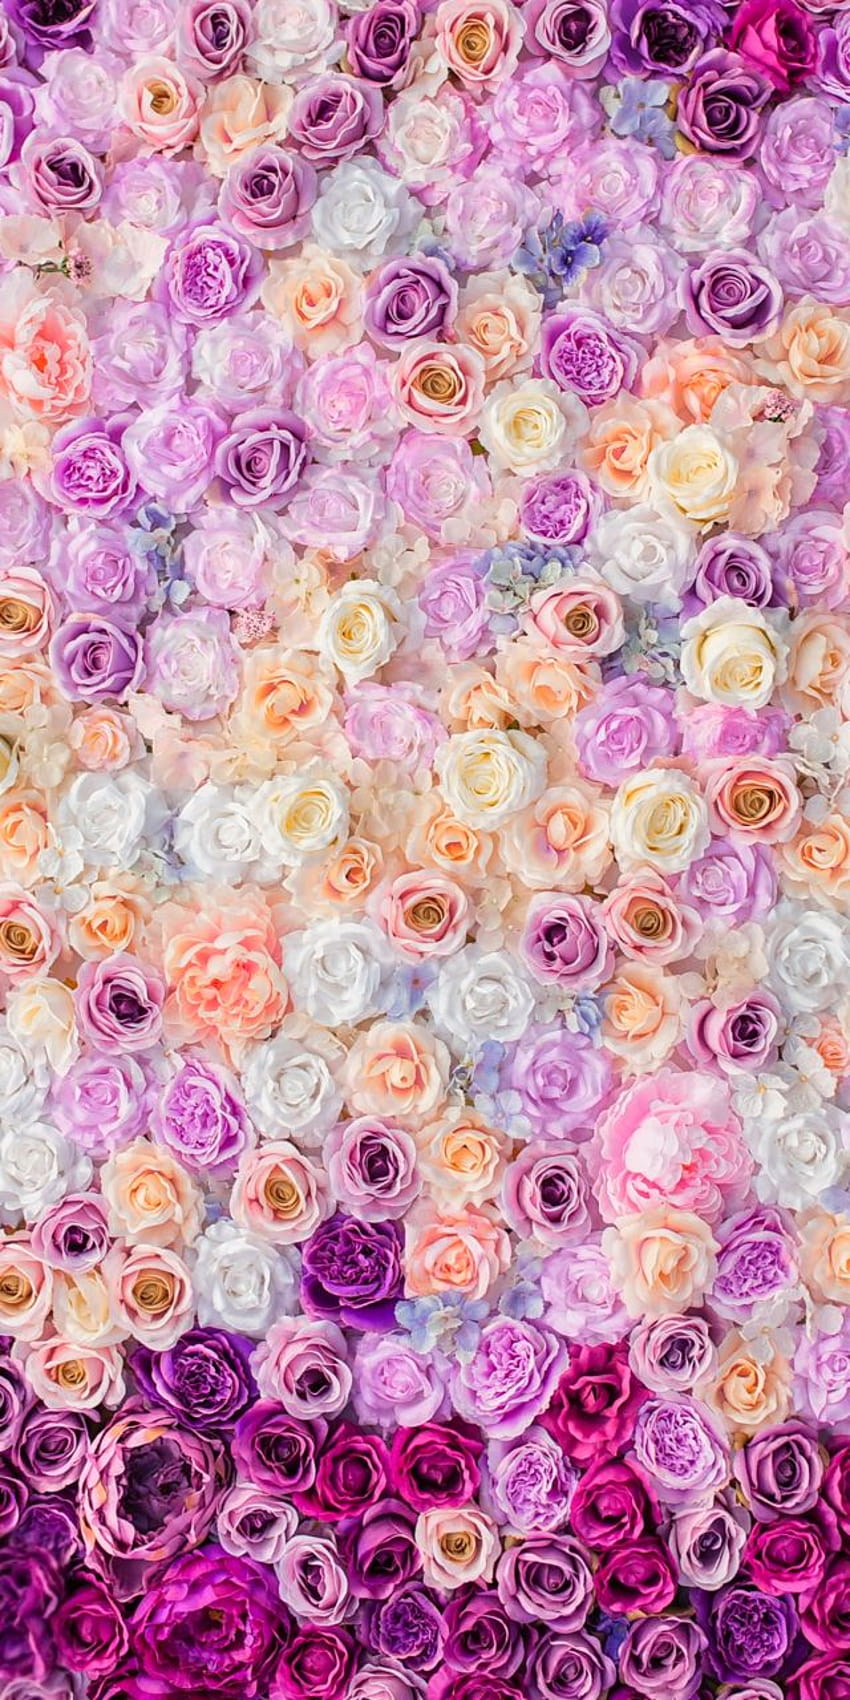 art, background, beautiful, beauty, camera, design, flowers, inspiration, luxury, pastel, pretty, retro, roses, soft, softy, still life, style, vintage, vintage style, we heart it, white, woman, backgrounds HD phone wallpaper